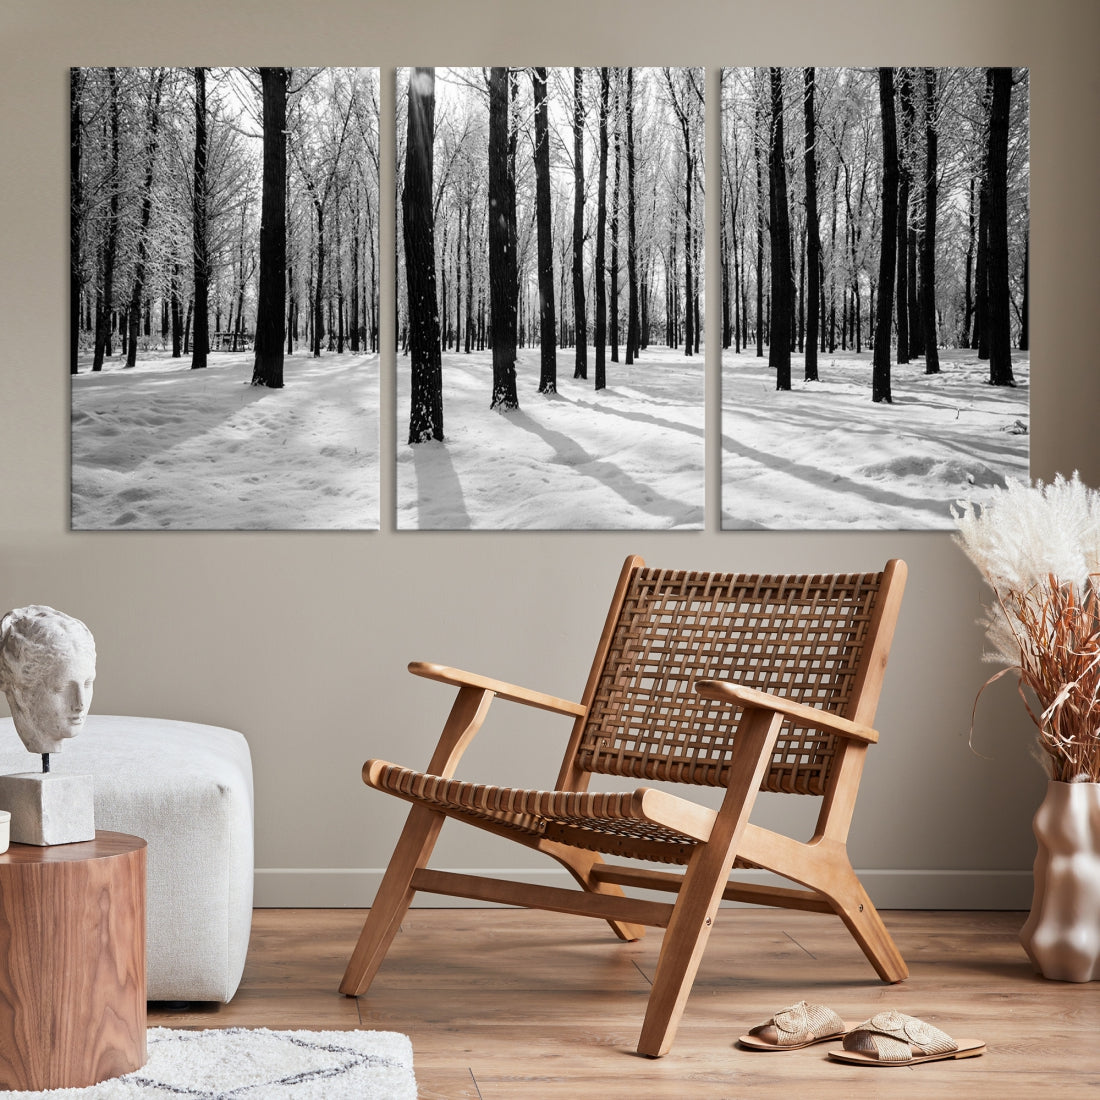 Trees in Winter Forest Wall Art Landscape Canvas Print Snow Photograpy Art